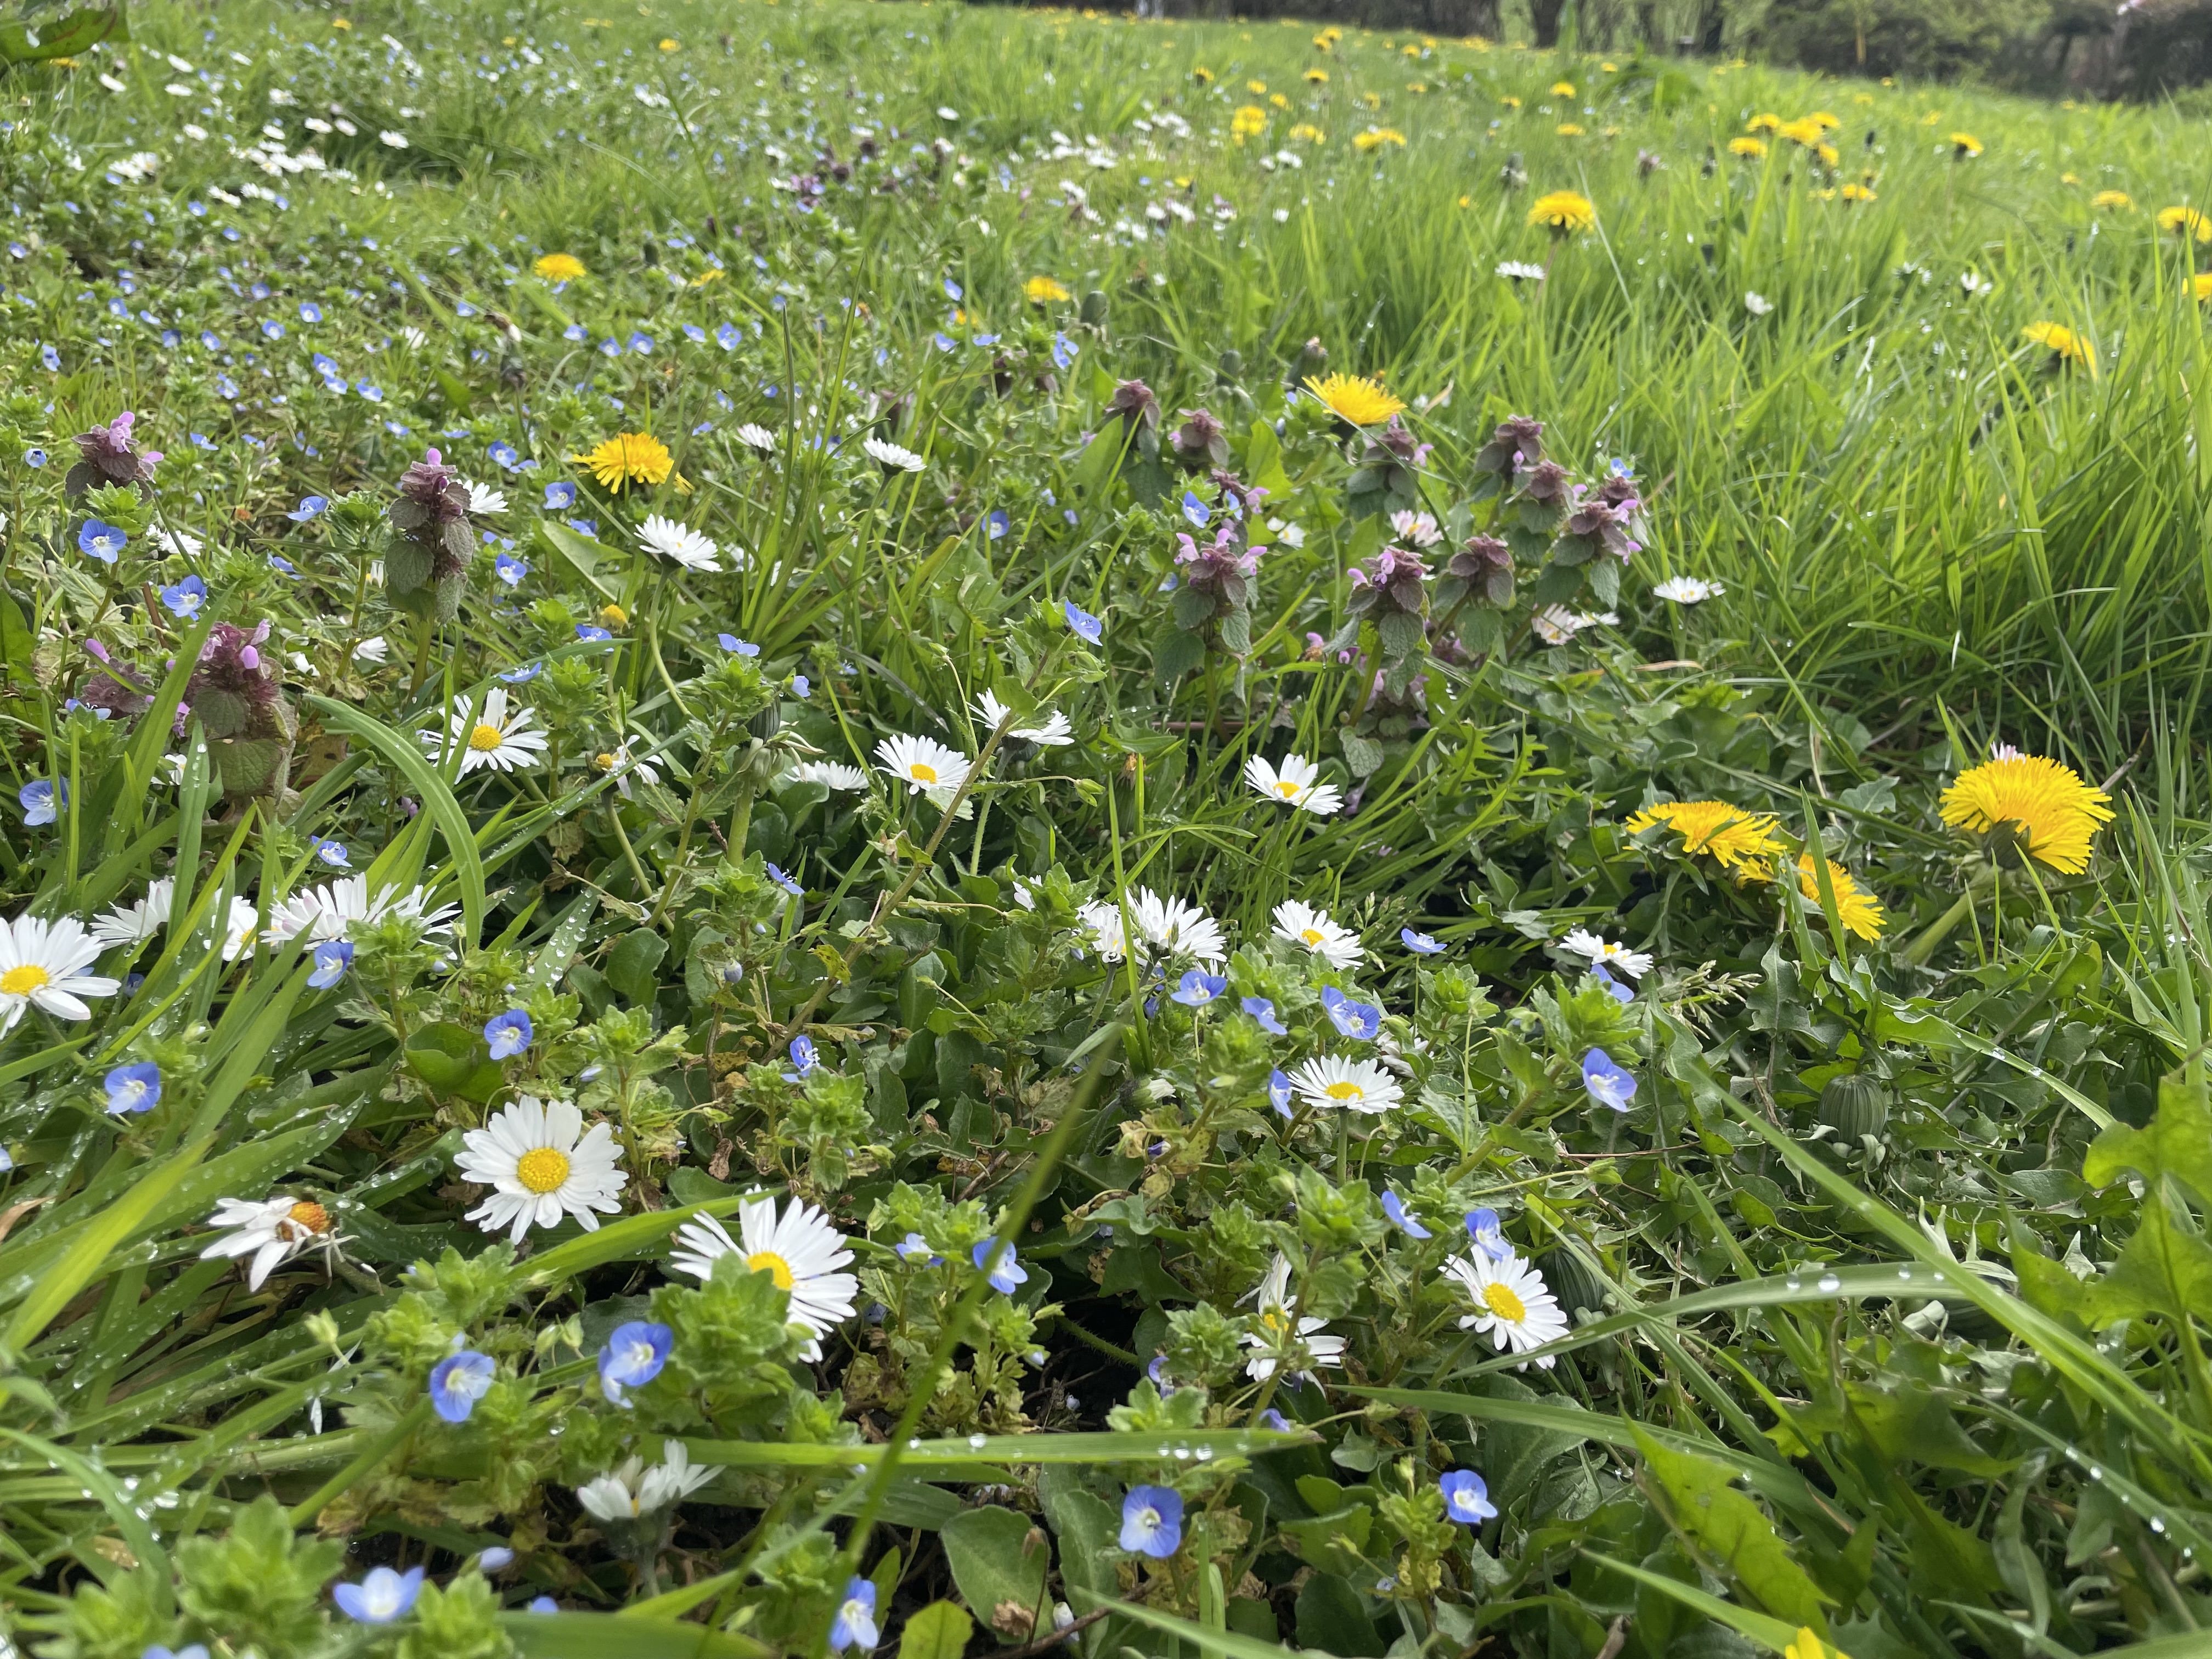 Daisies, dandelions and speedwell amongst lawn grass